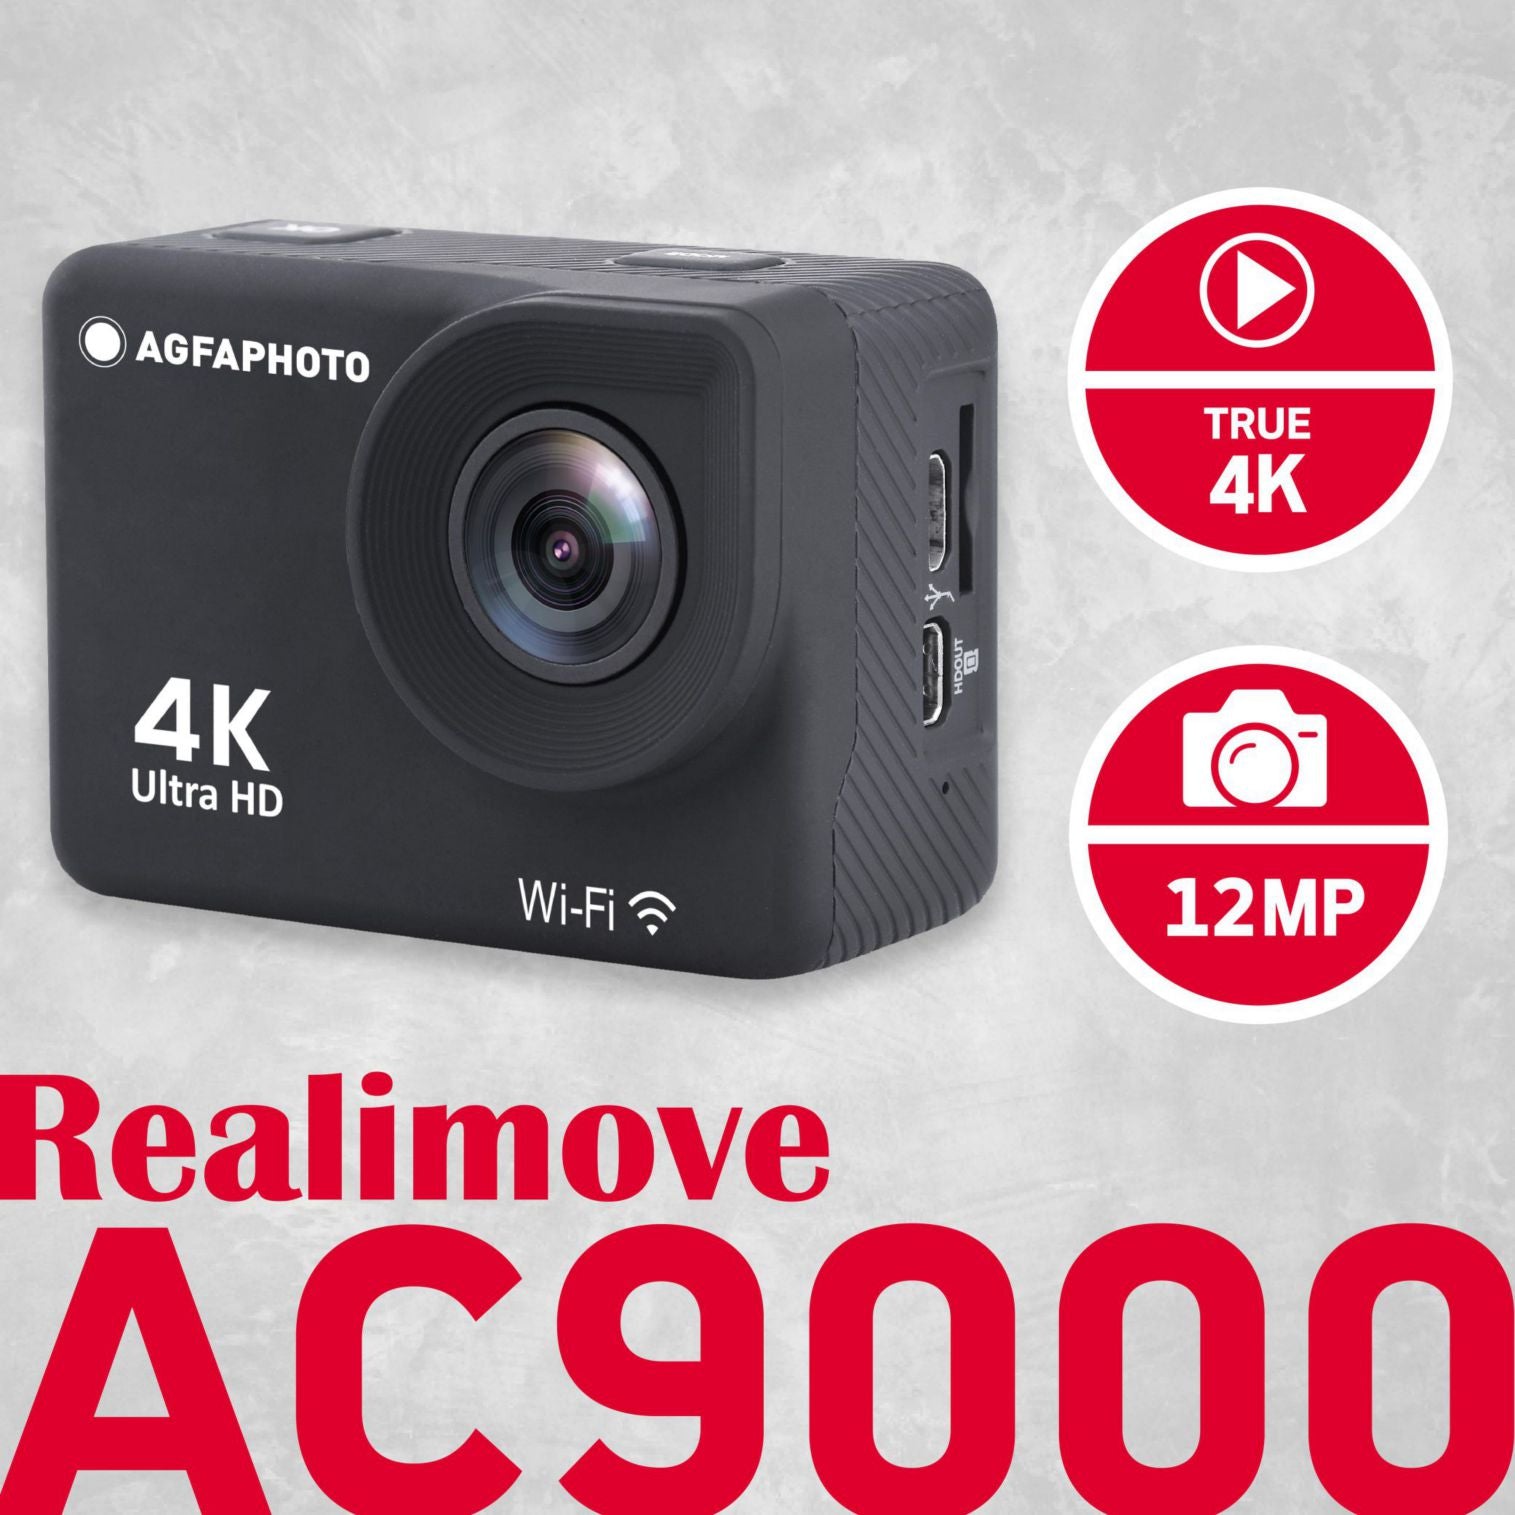 agfaphoto 4k ultra hd action cam is true 4k and 12 mp